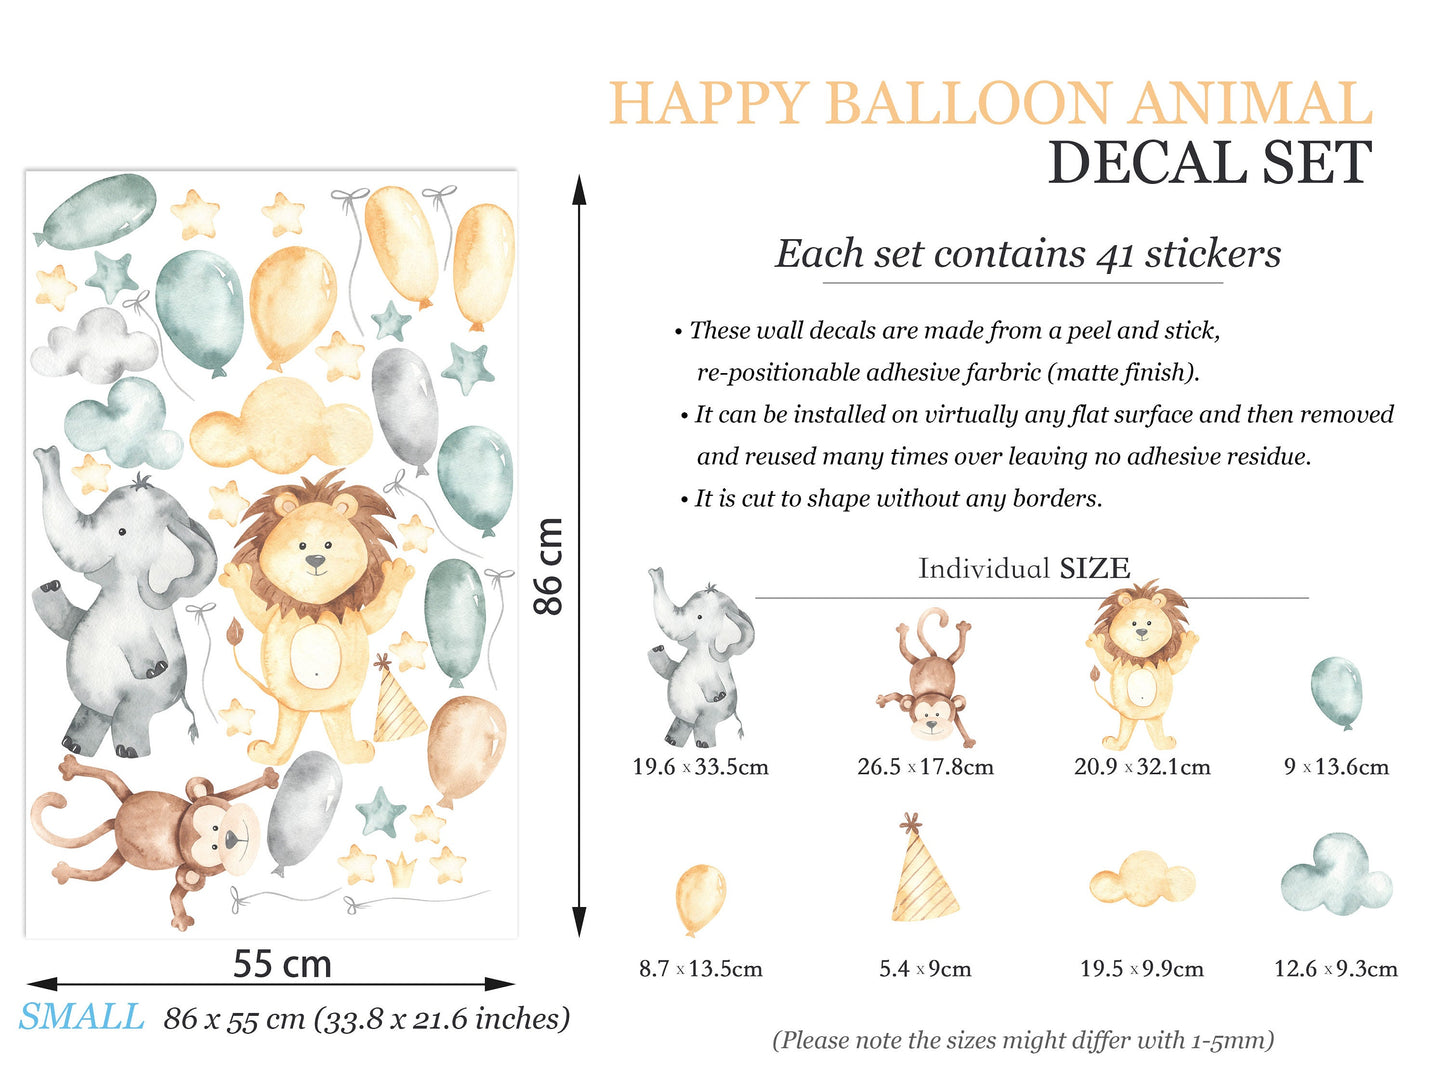 Adventurous Animal Trio Flying with Balloons in Starry Sky Wall Decal - BR087